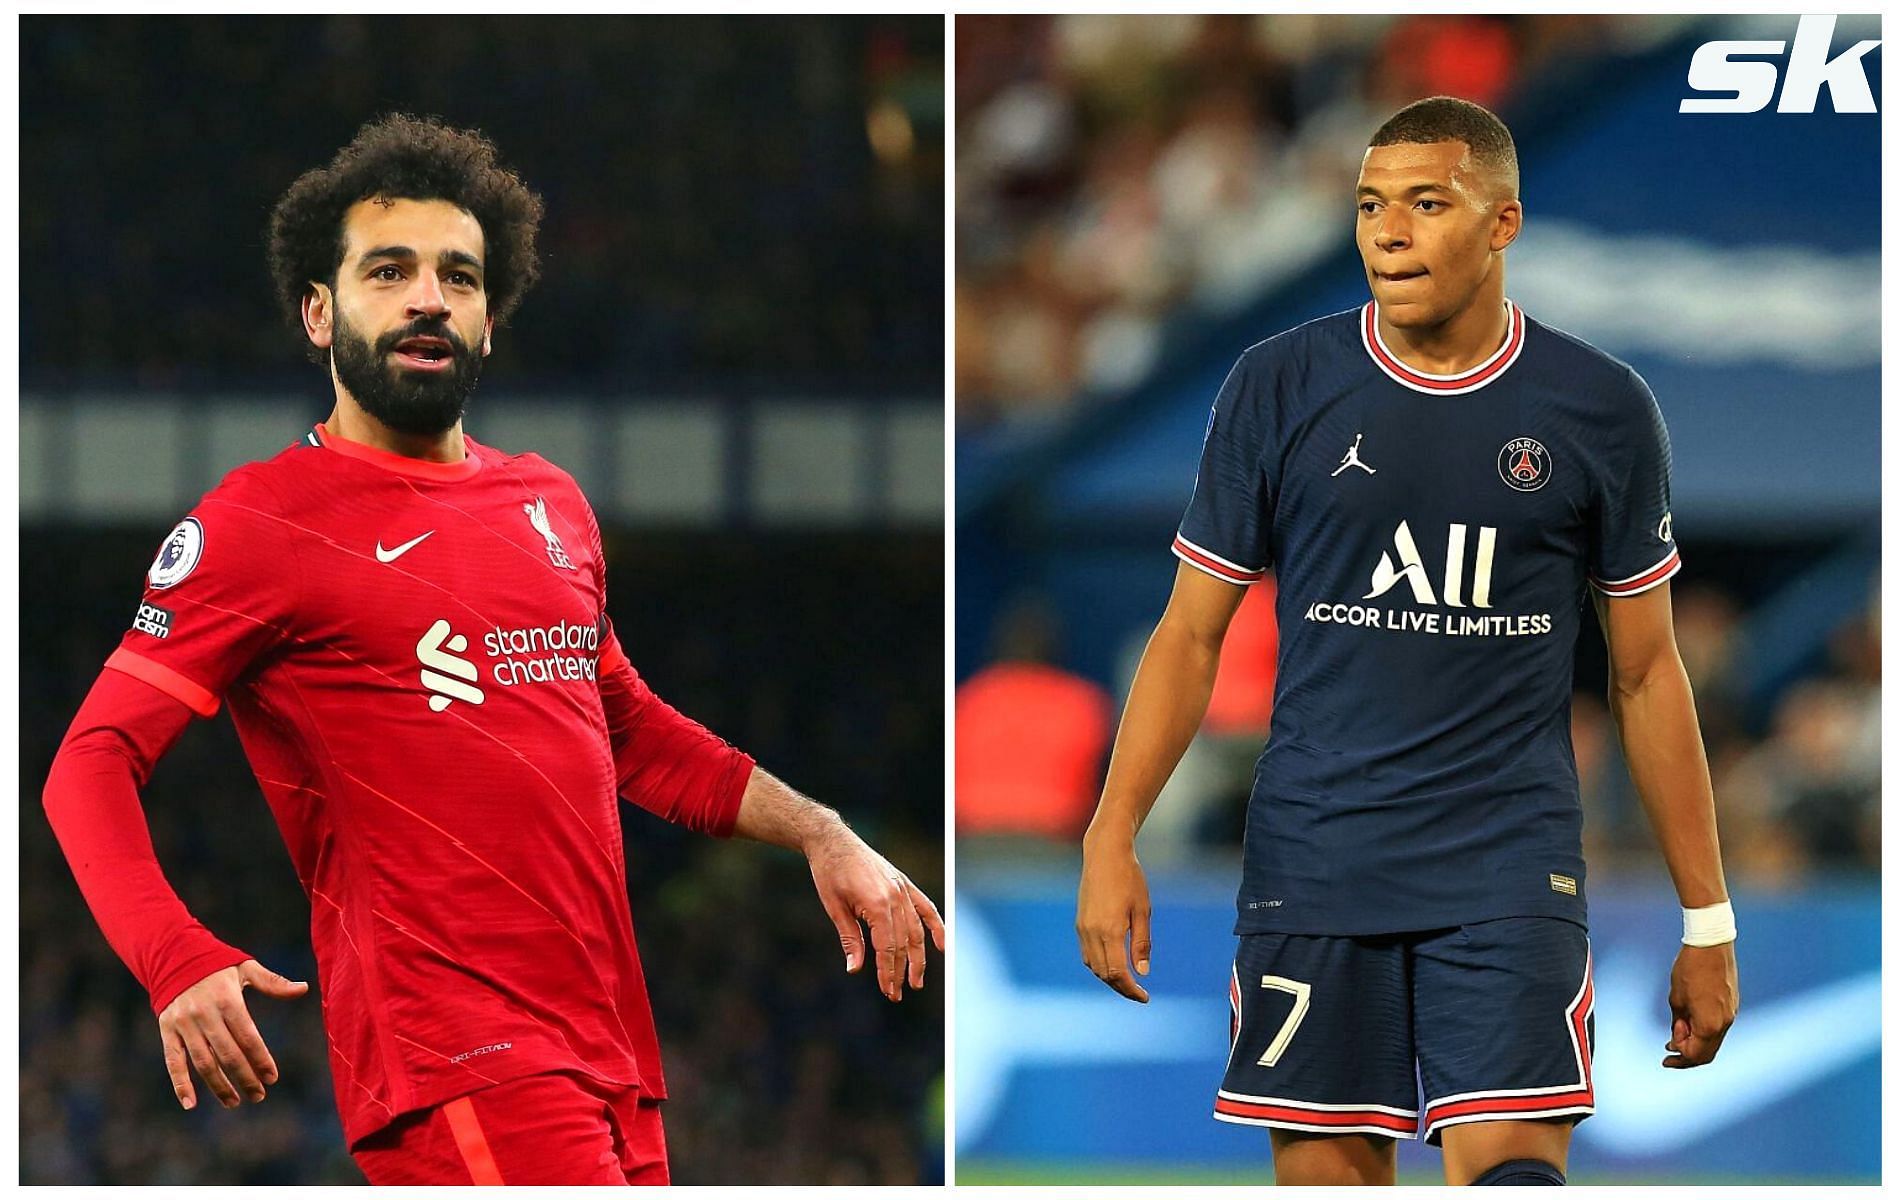 Mohamed Salah and Kylian Mbappe are among the players with the most assists this season.